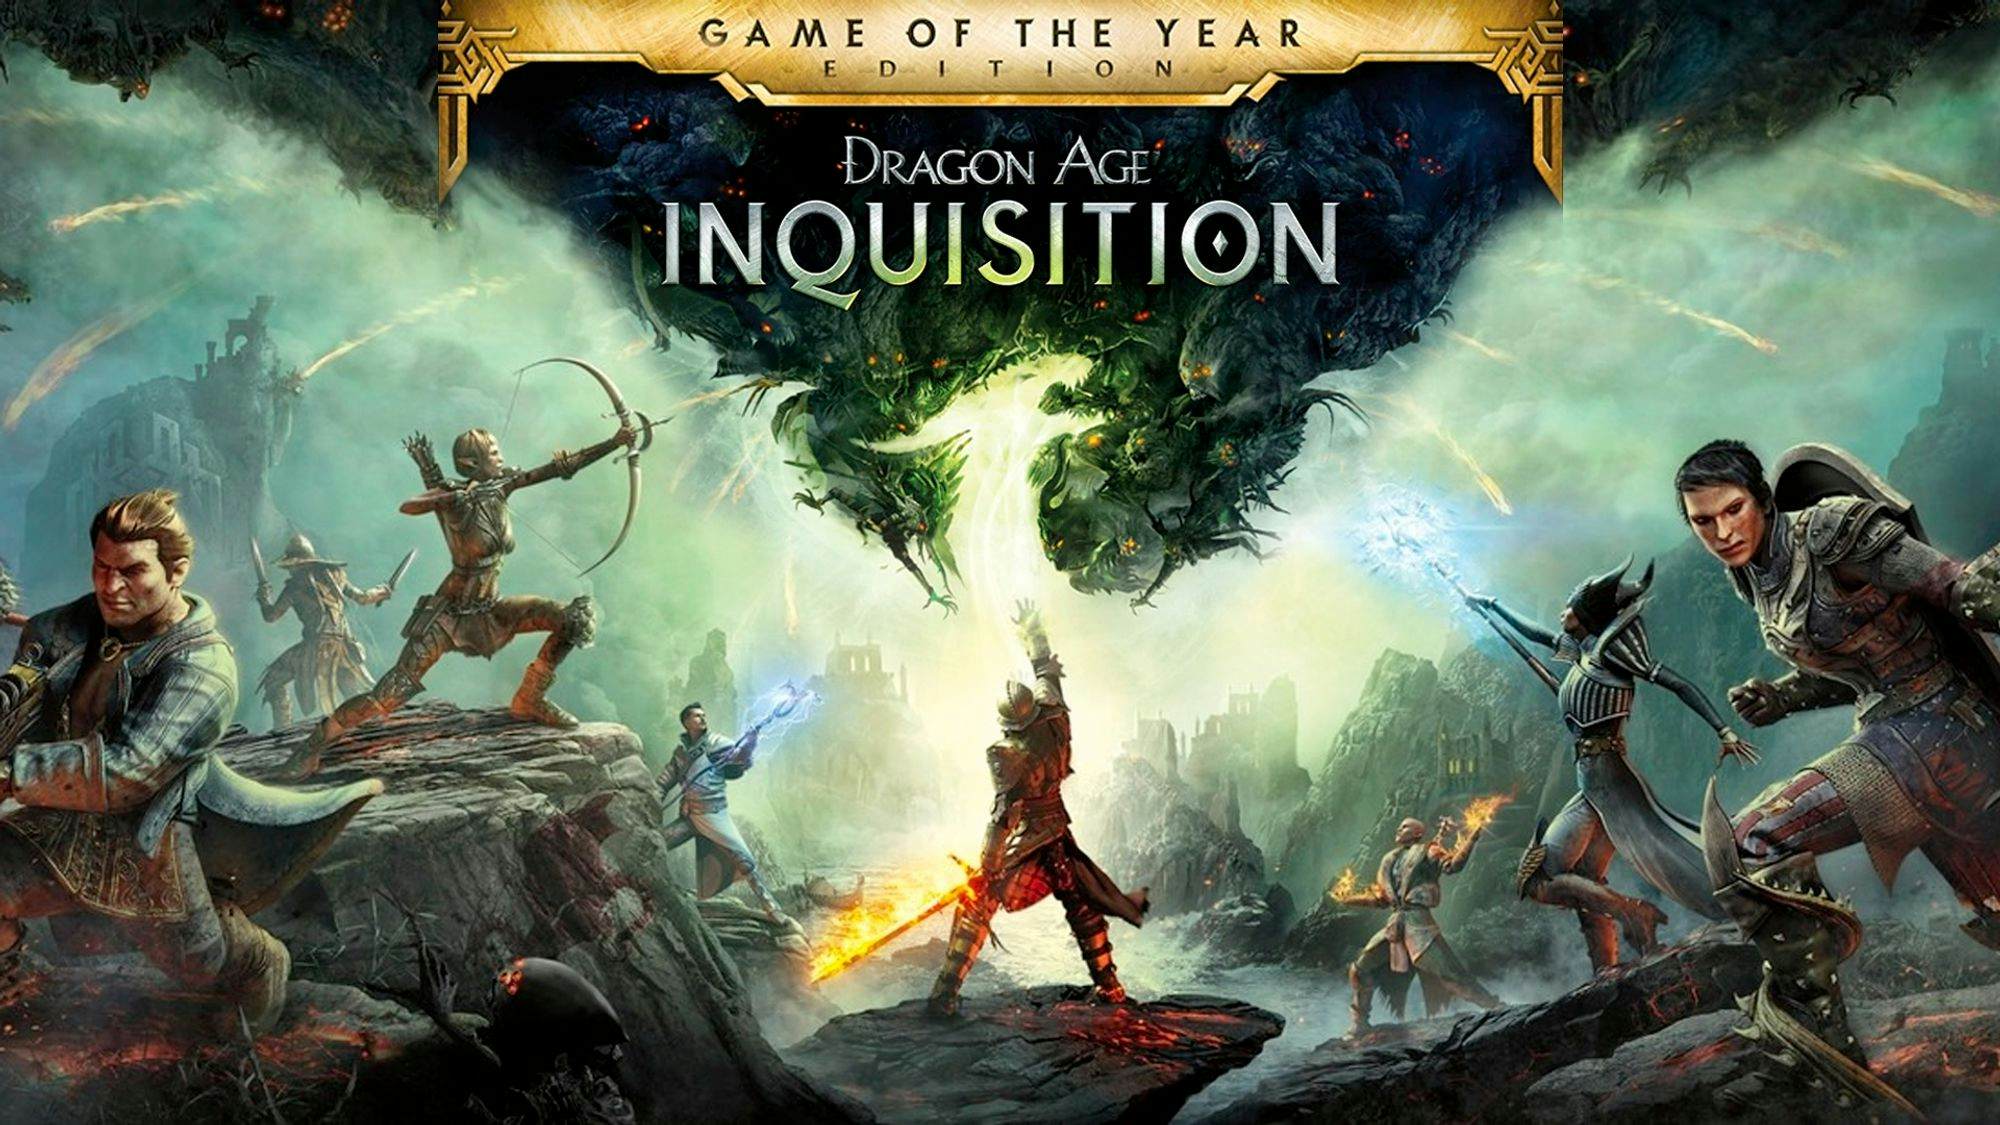 Dragon Age: Inquisition – Game of the Year Edition - Grátis na Epic Games